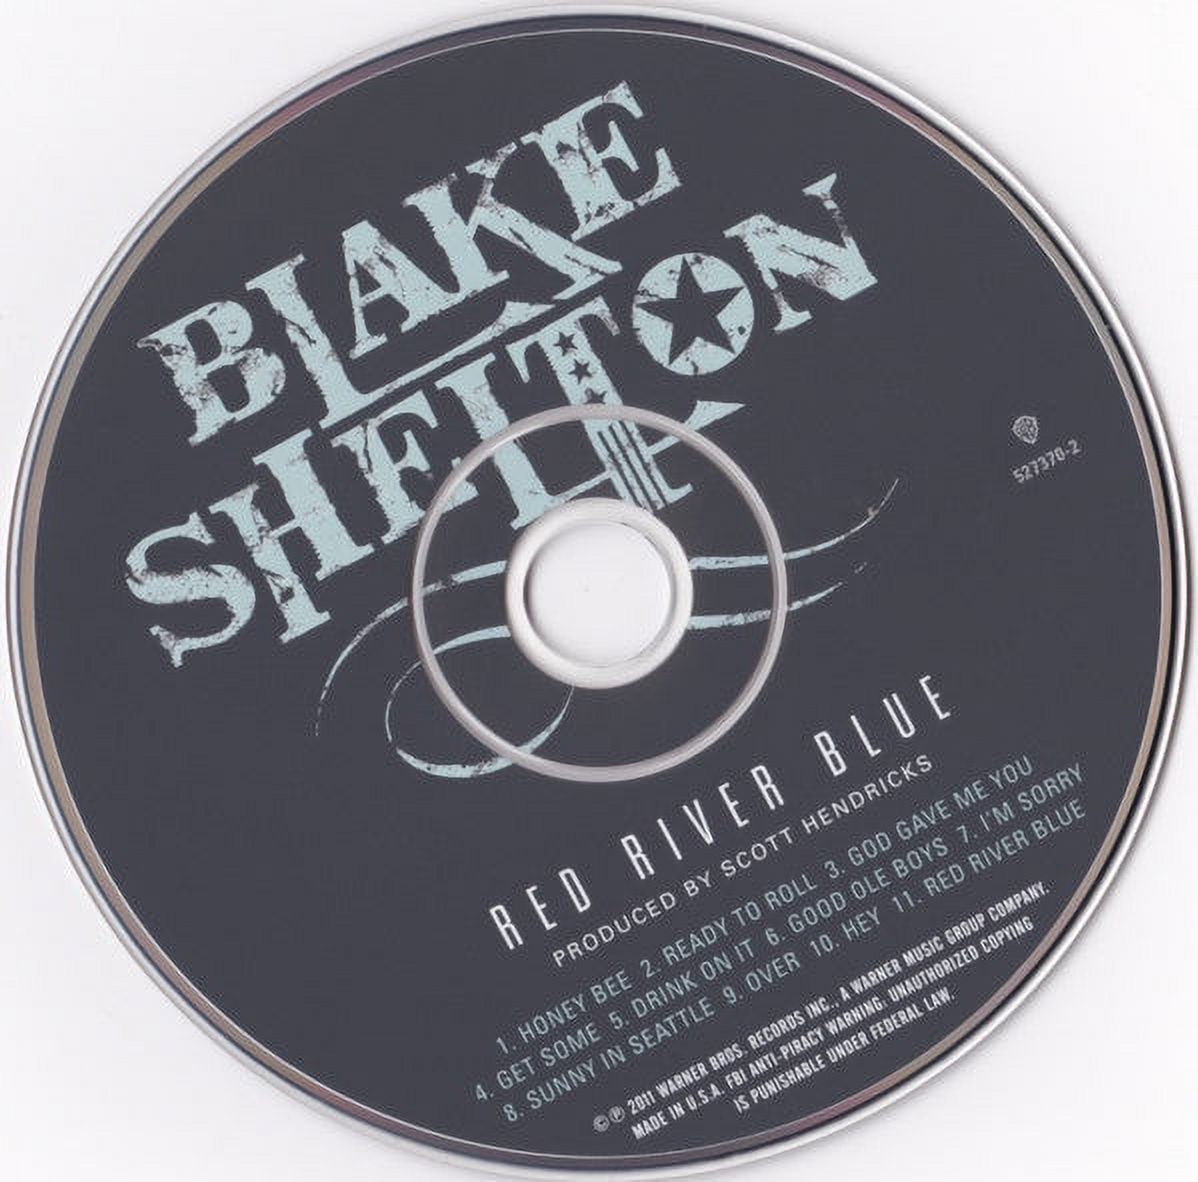 Blake Shelton - Red River Blue - Country - CD - image 5 of 5